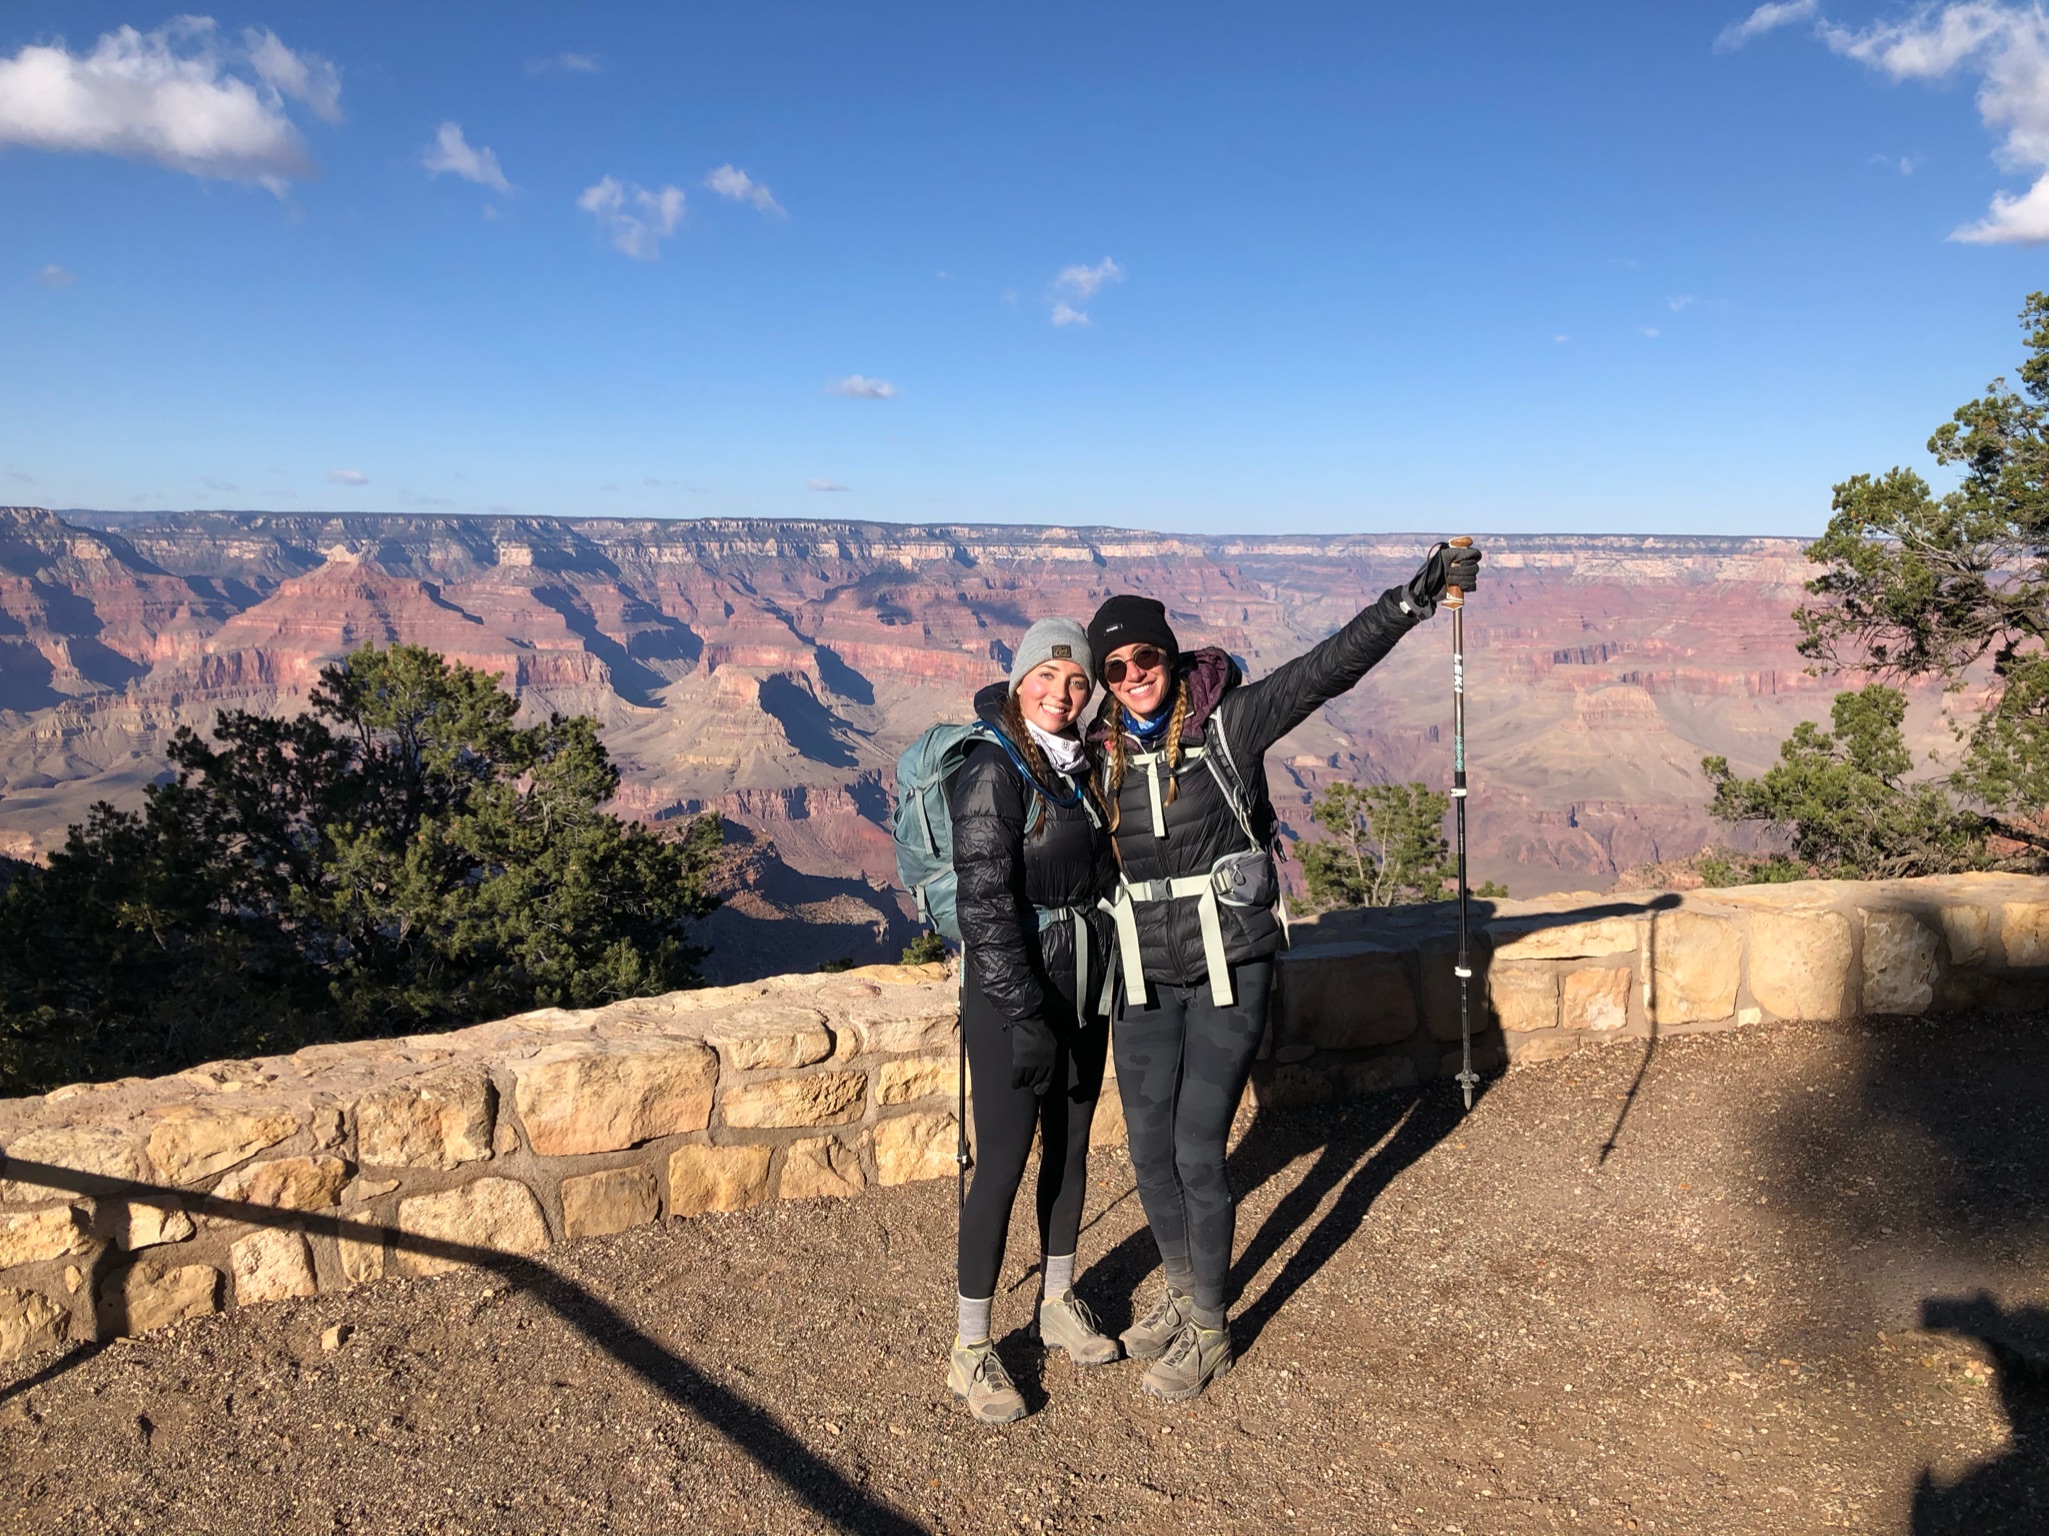 Hikers on South Rim after successful crossing of Rim to Rim Grand Canyon.